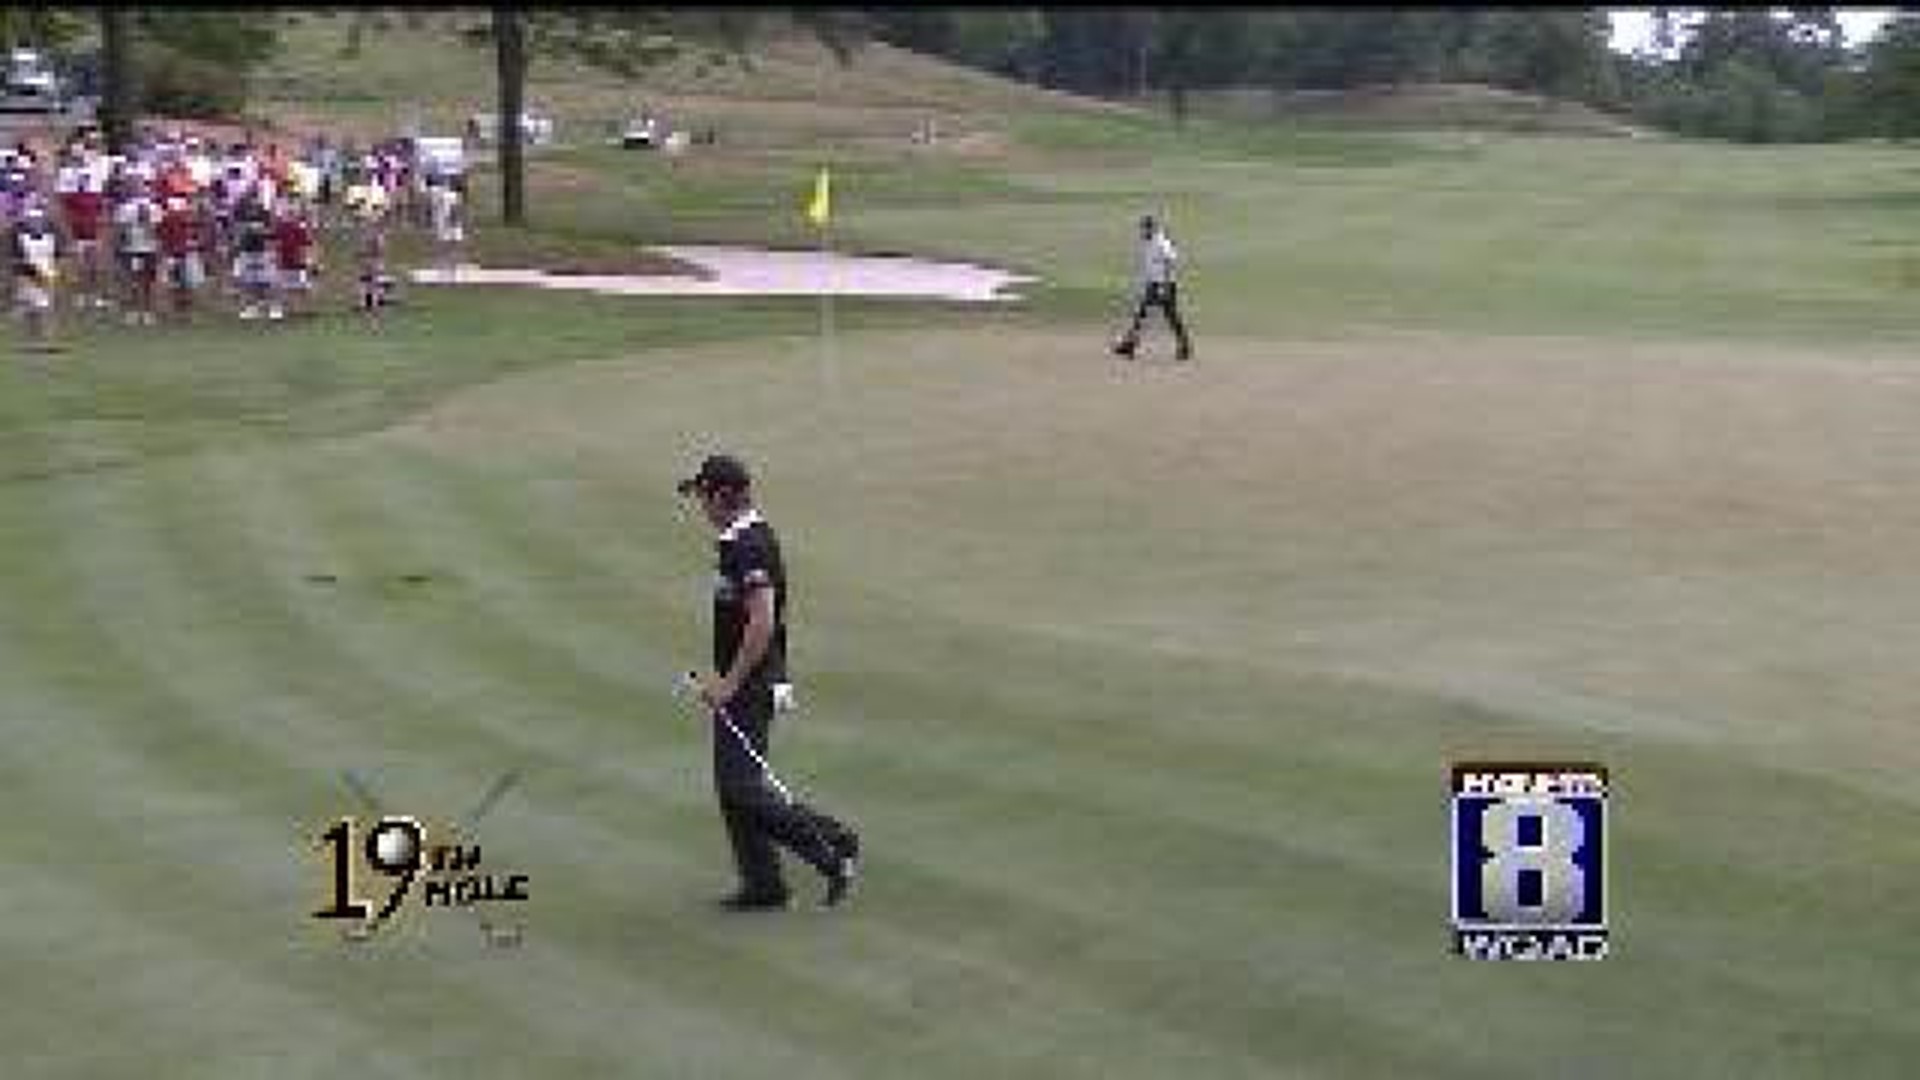 Golf Discount Shot Of The Day